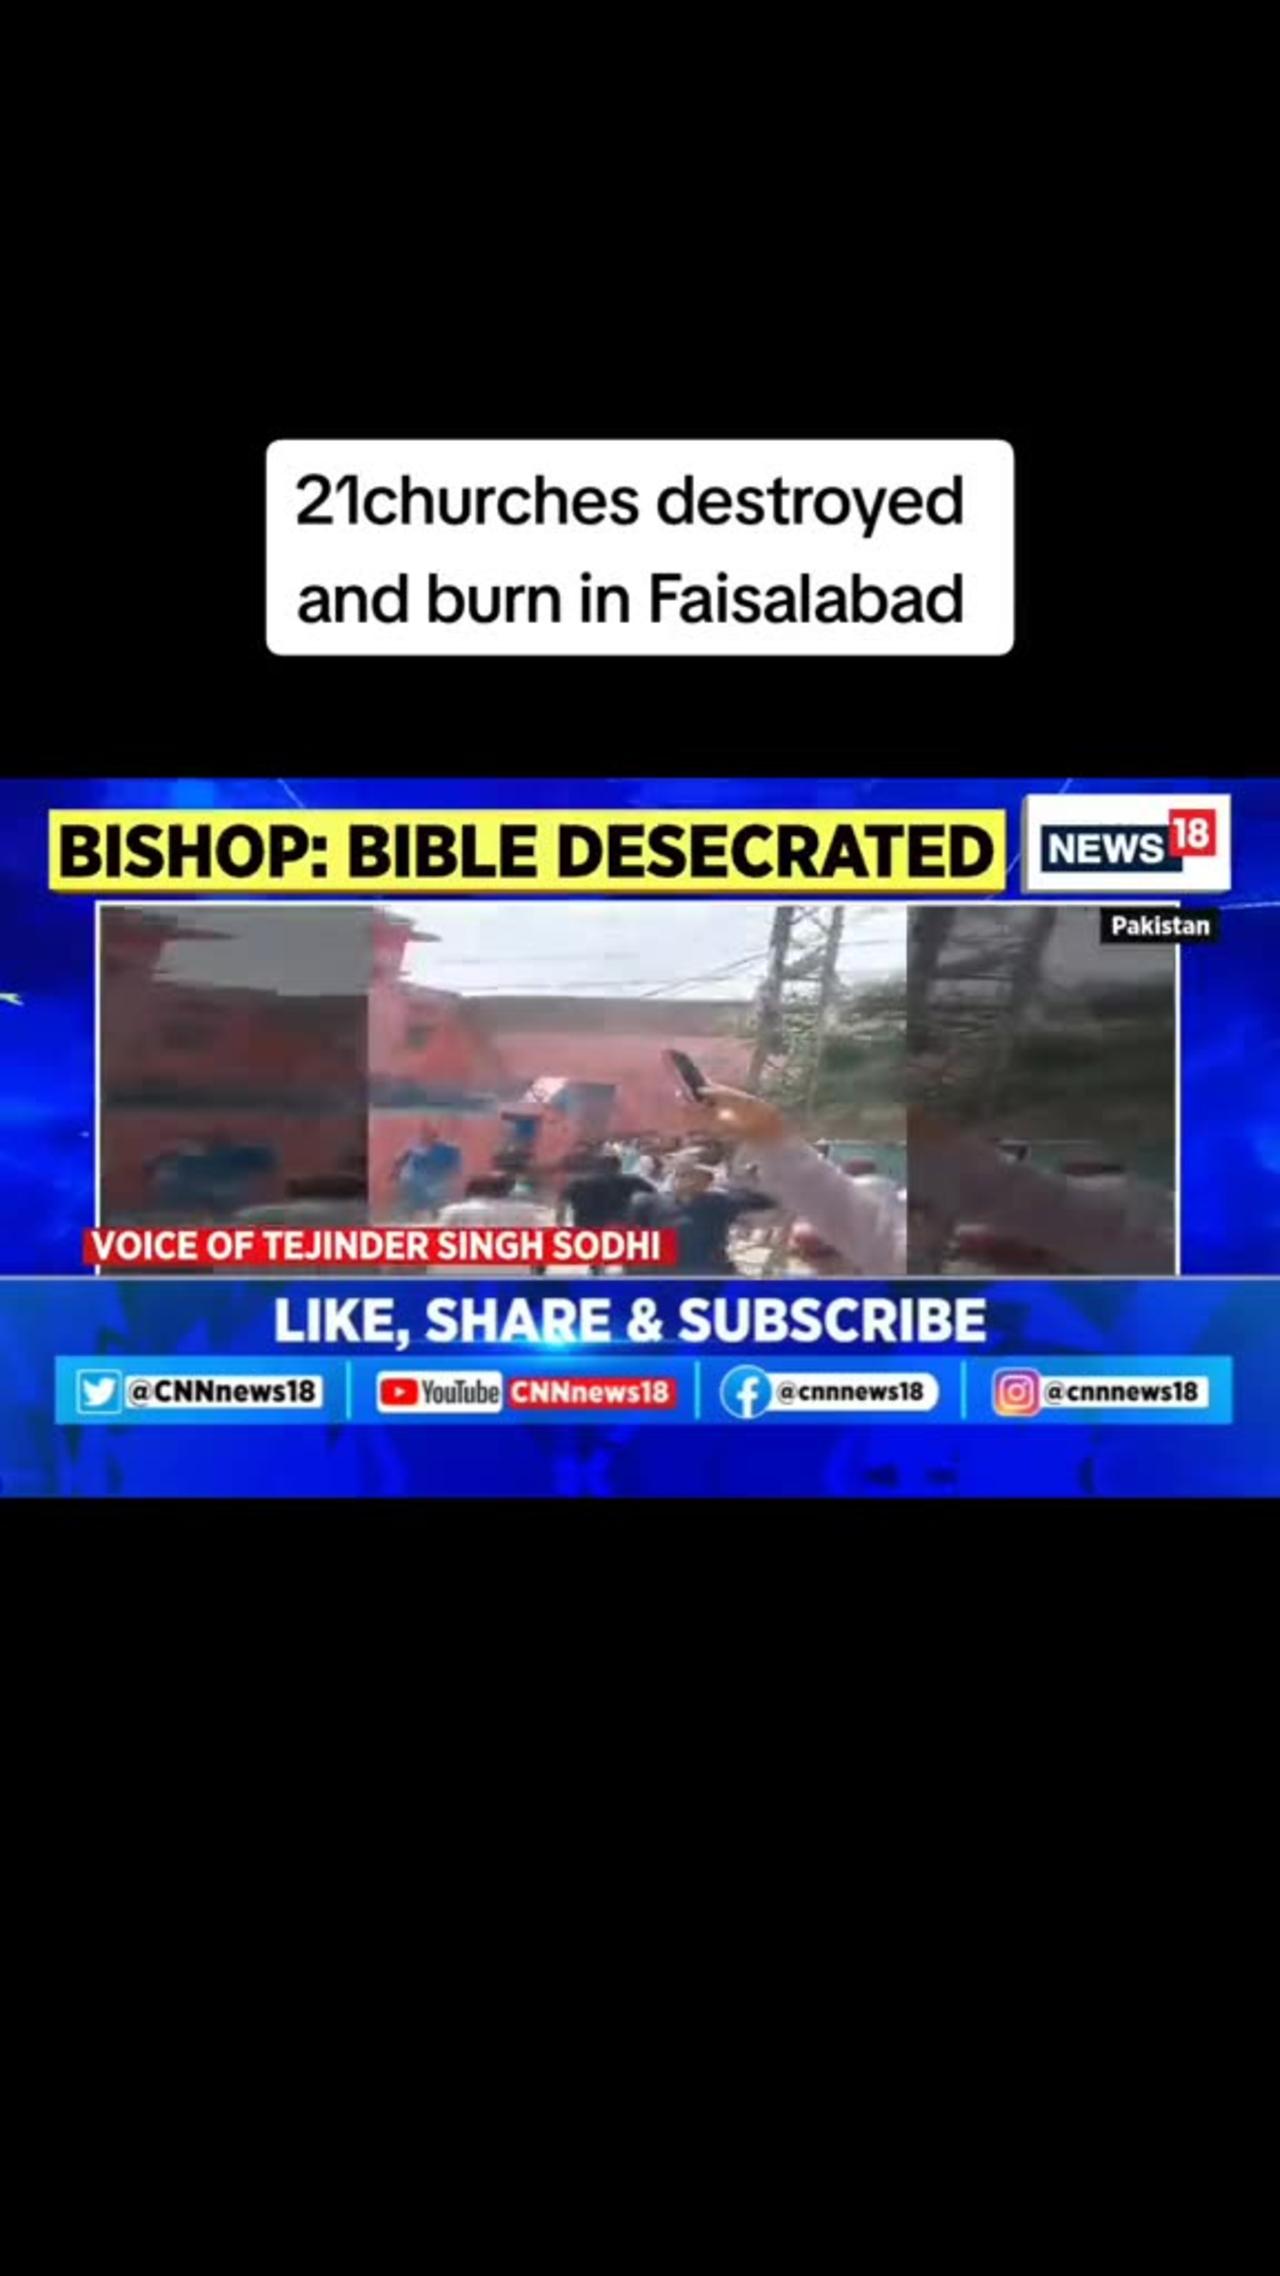 destruction and burning of 21 churches in Faisalabad, Pakistan